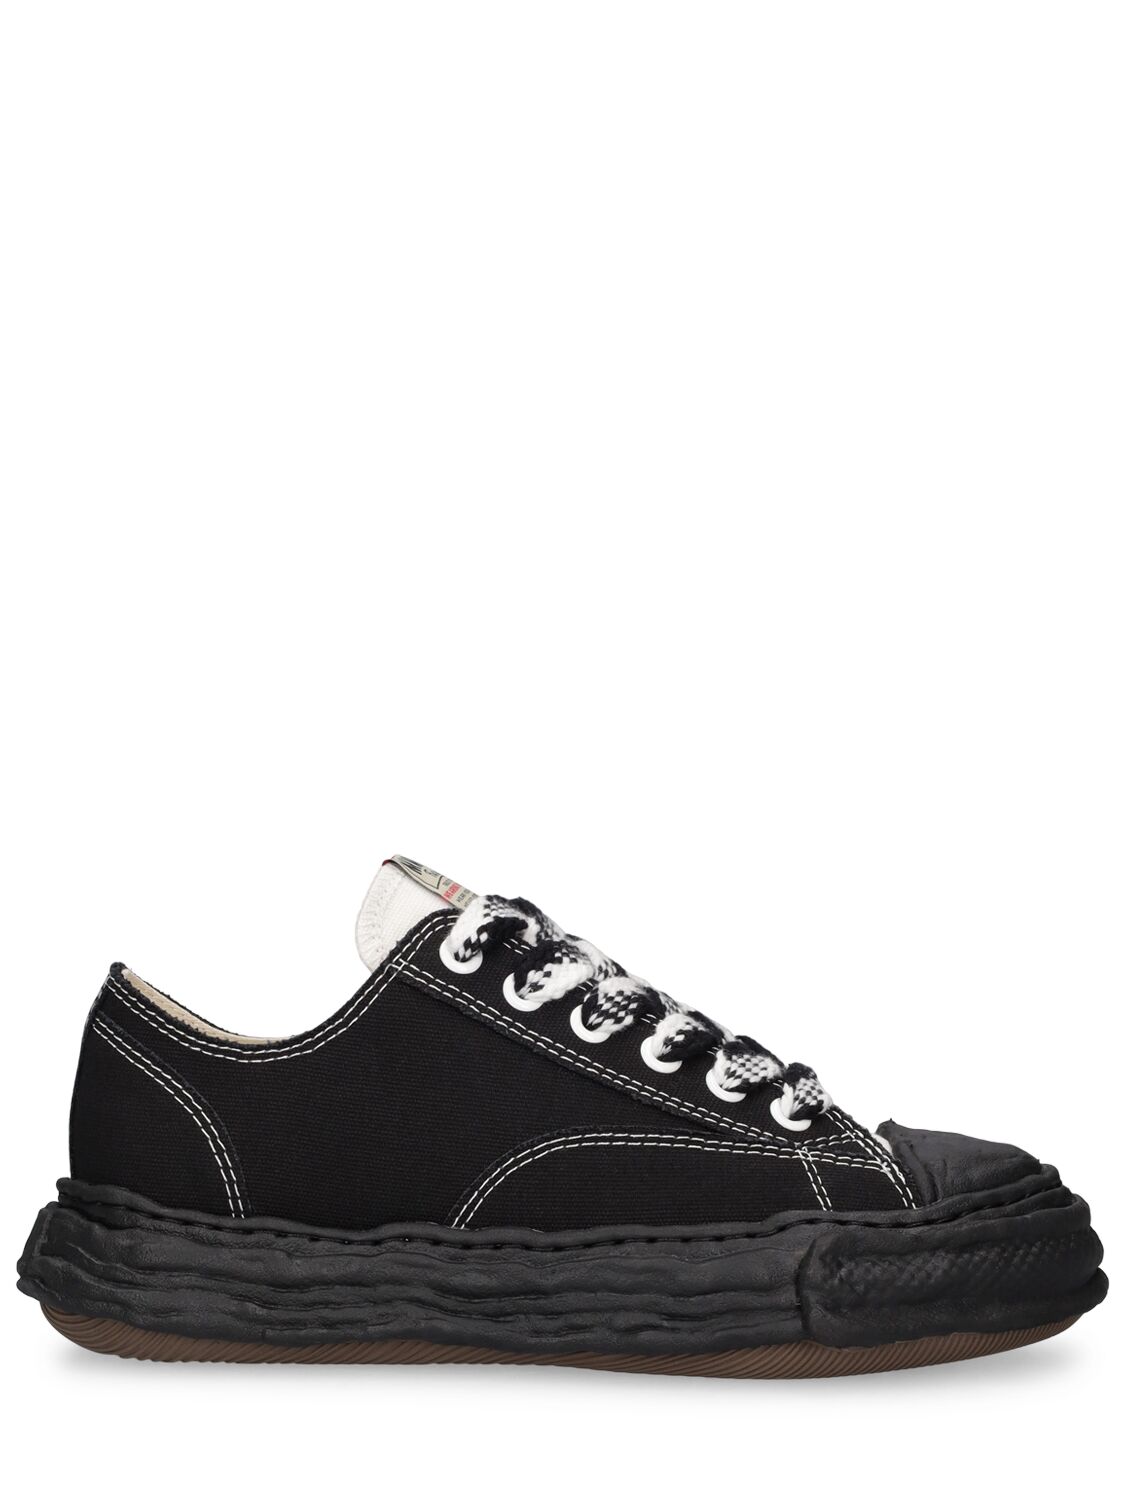 Miharayasuhiro Peterson Low 23 Og Sole Canvas Sneakers In Black